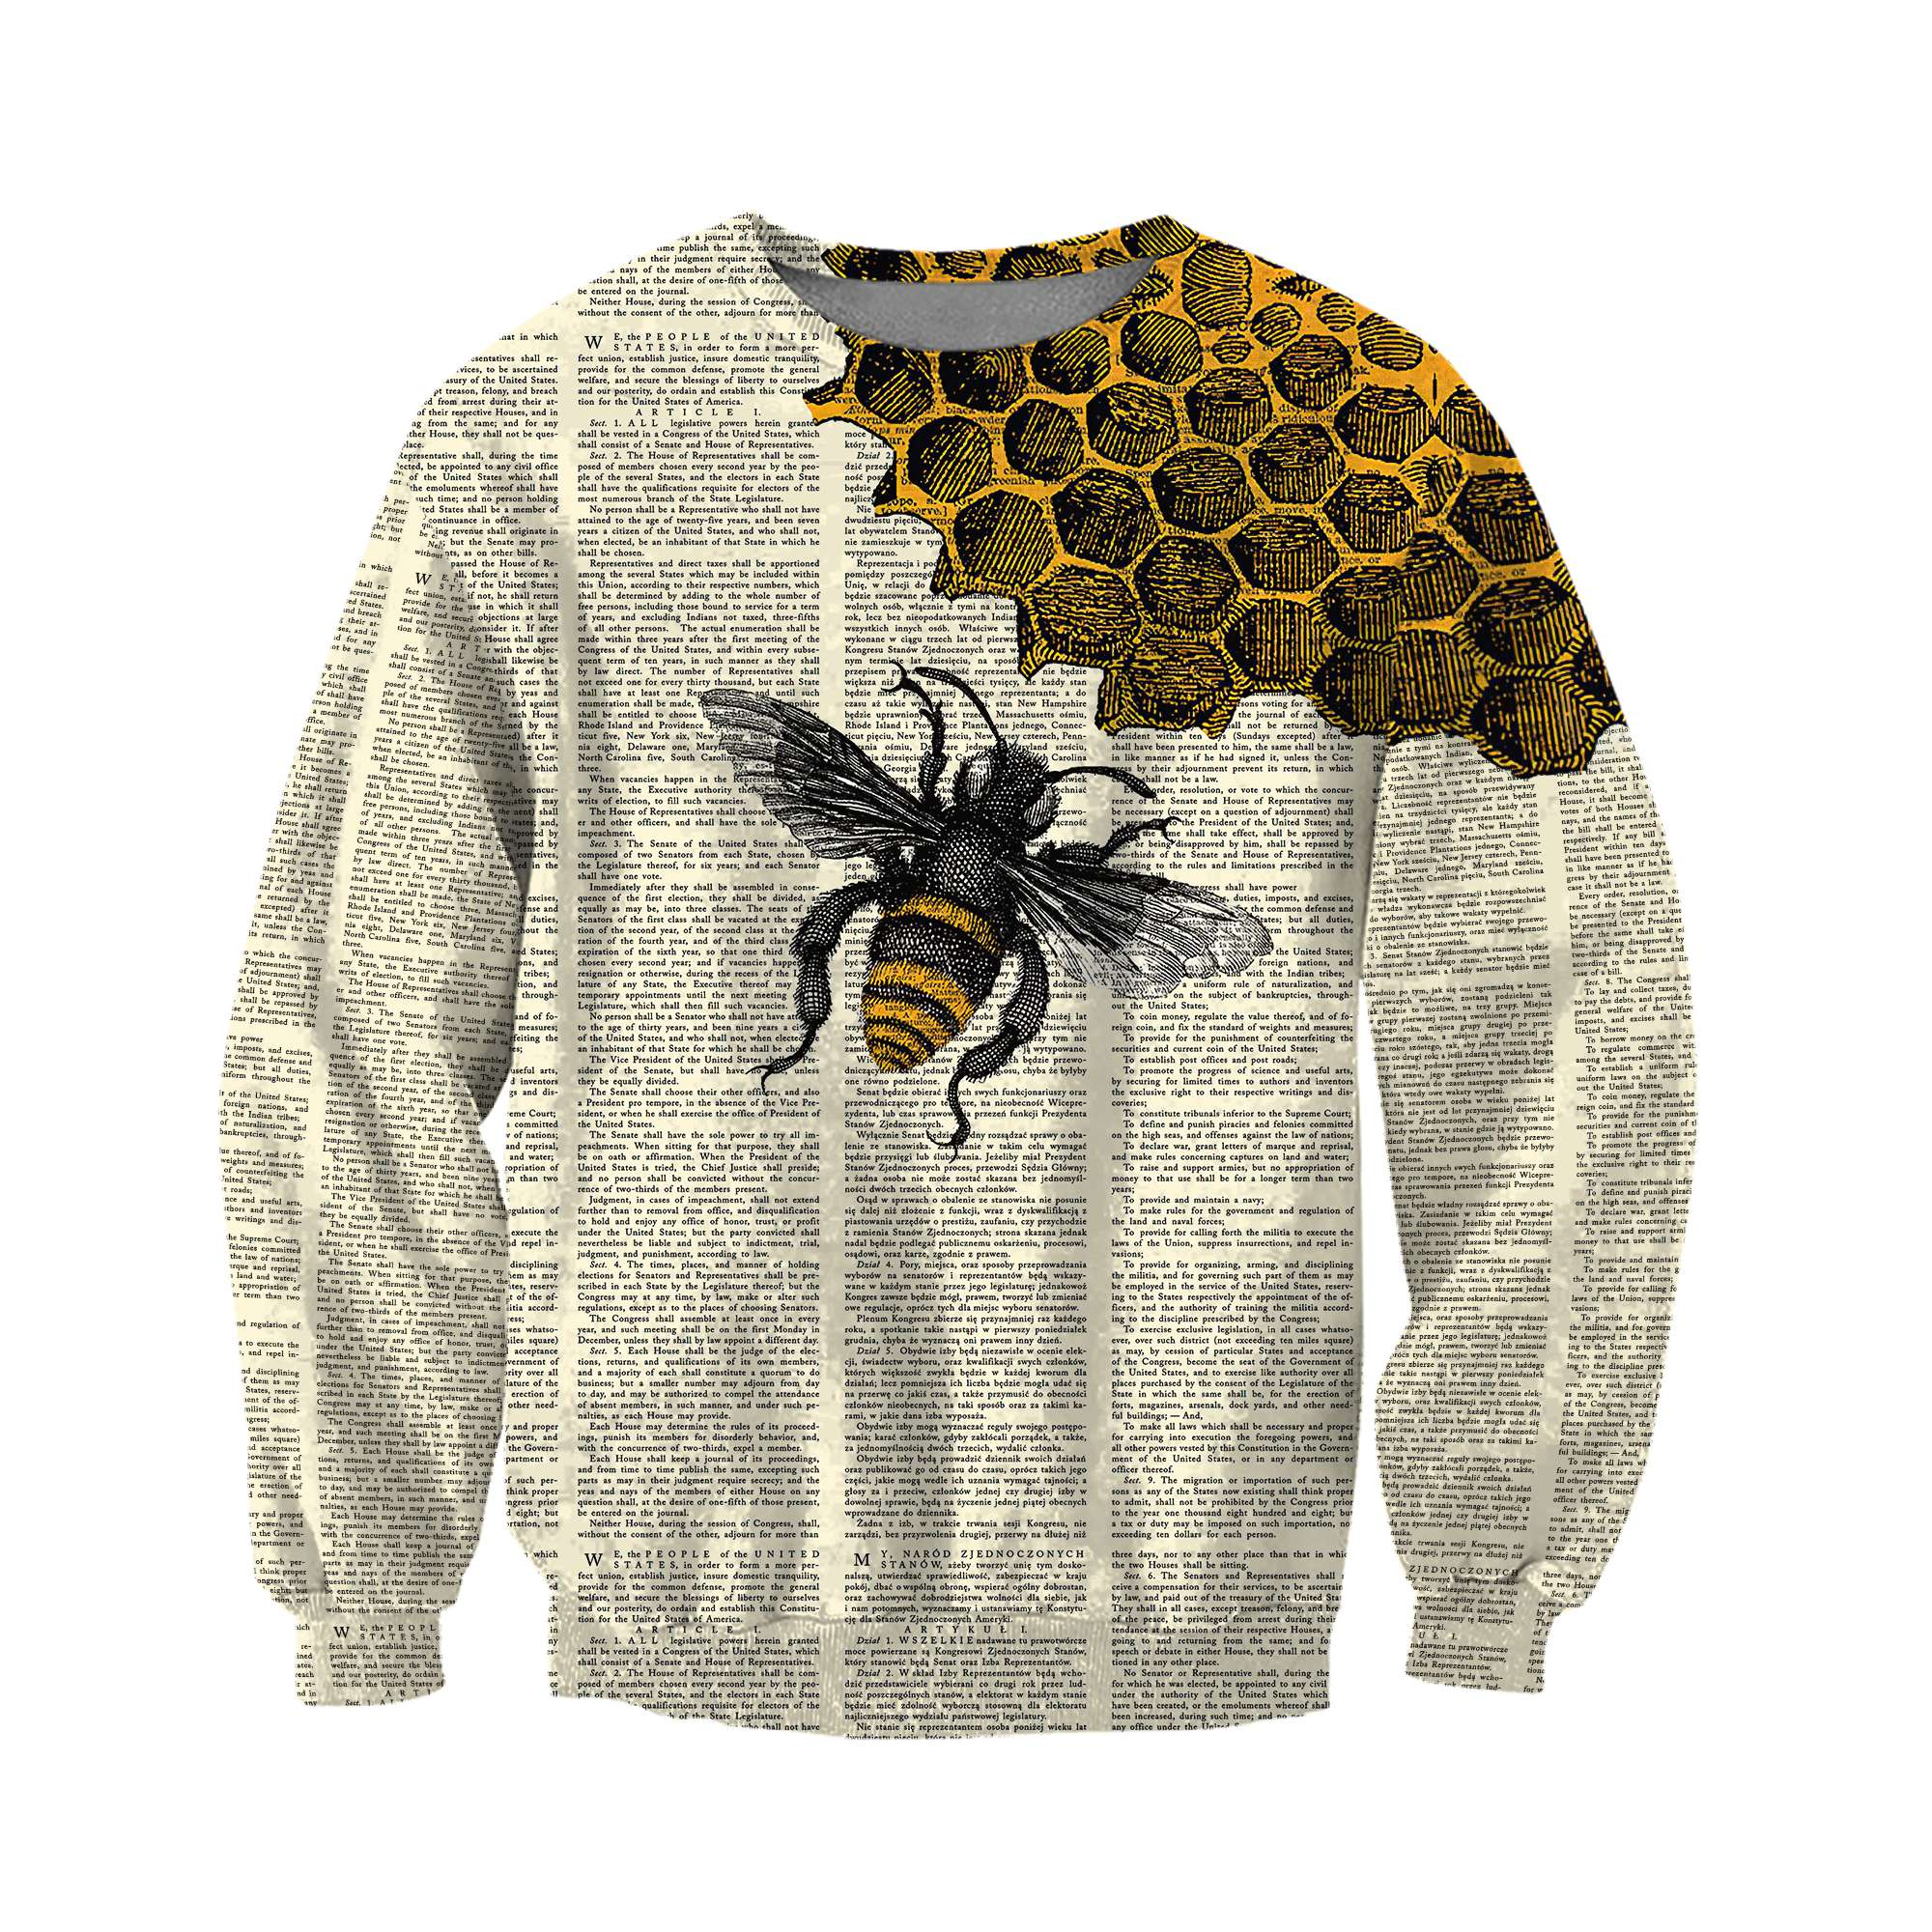 3D All Over Print Bee Shirt/ Bee Dictionary Page Premium Hoodie For Men Women/ Bee Lover Outfit